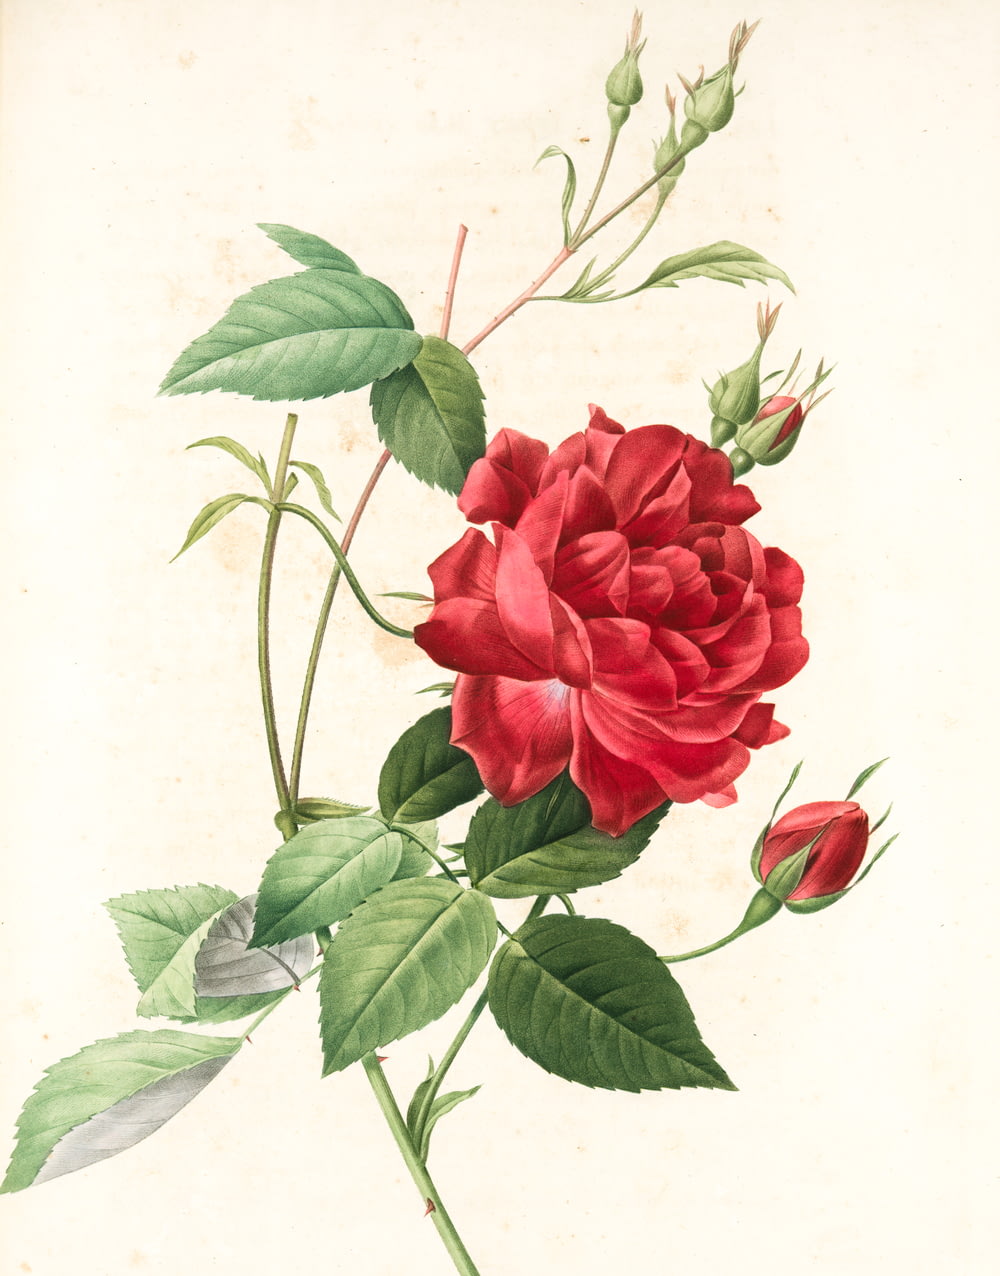 a drawing of a red rose with green leaves